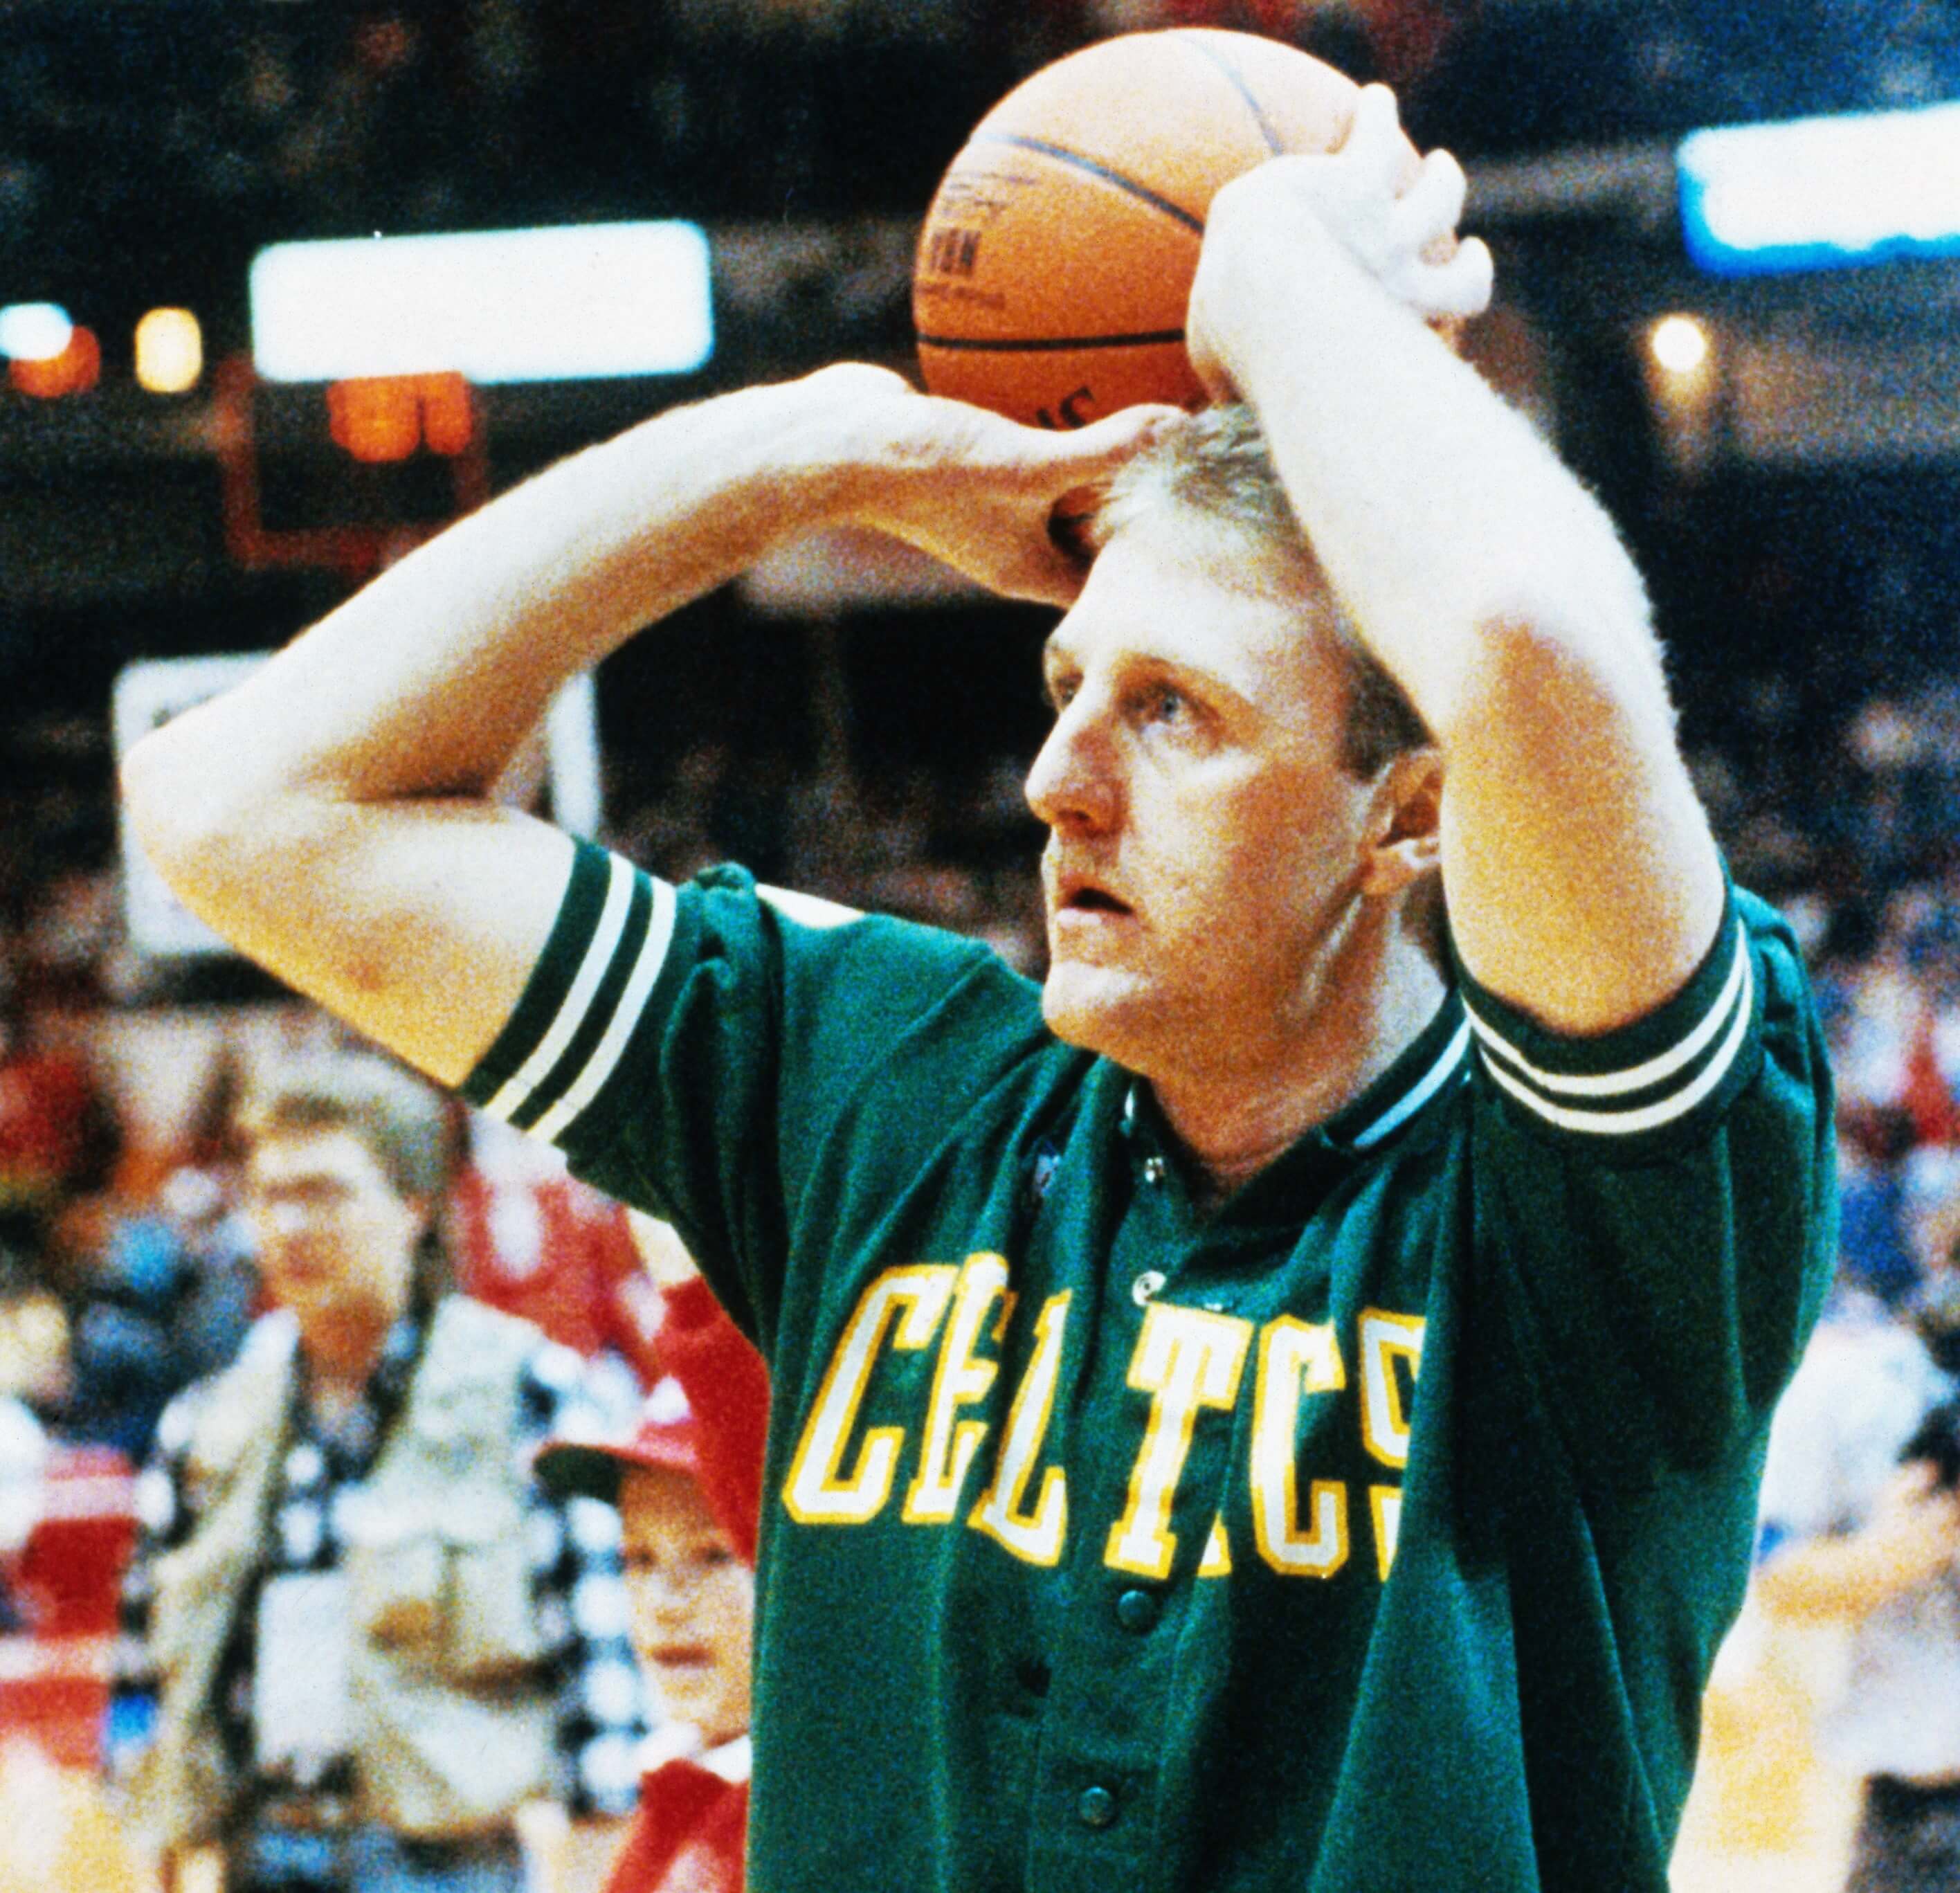 Larry Bird warms up during an NBA three-point contest.